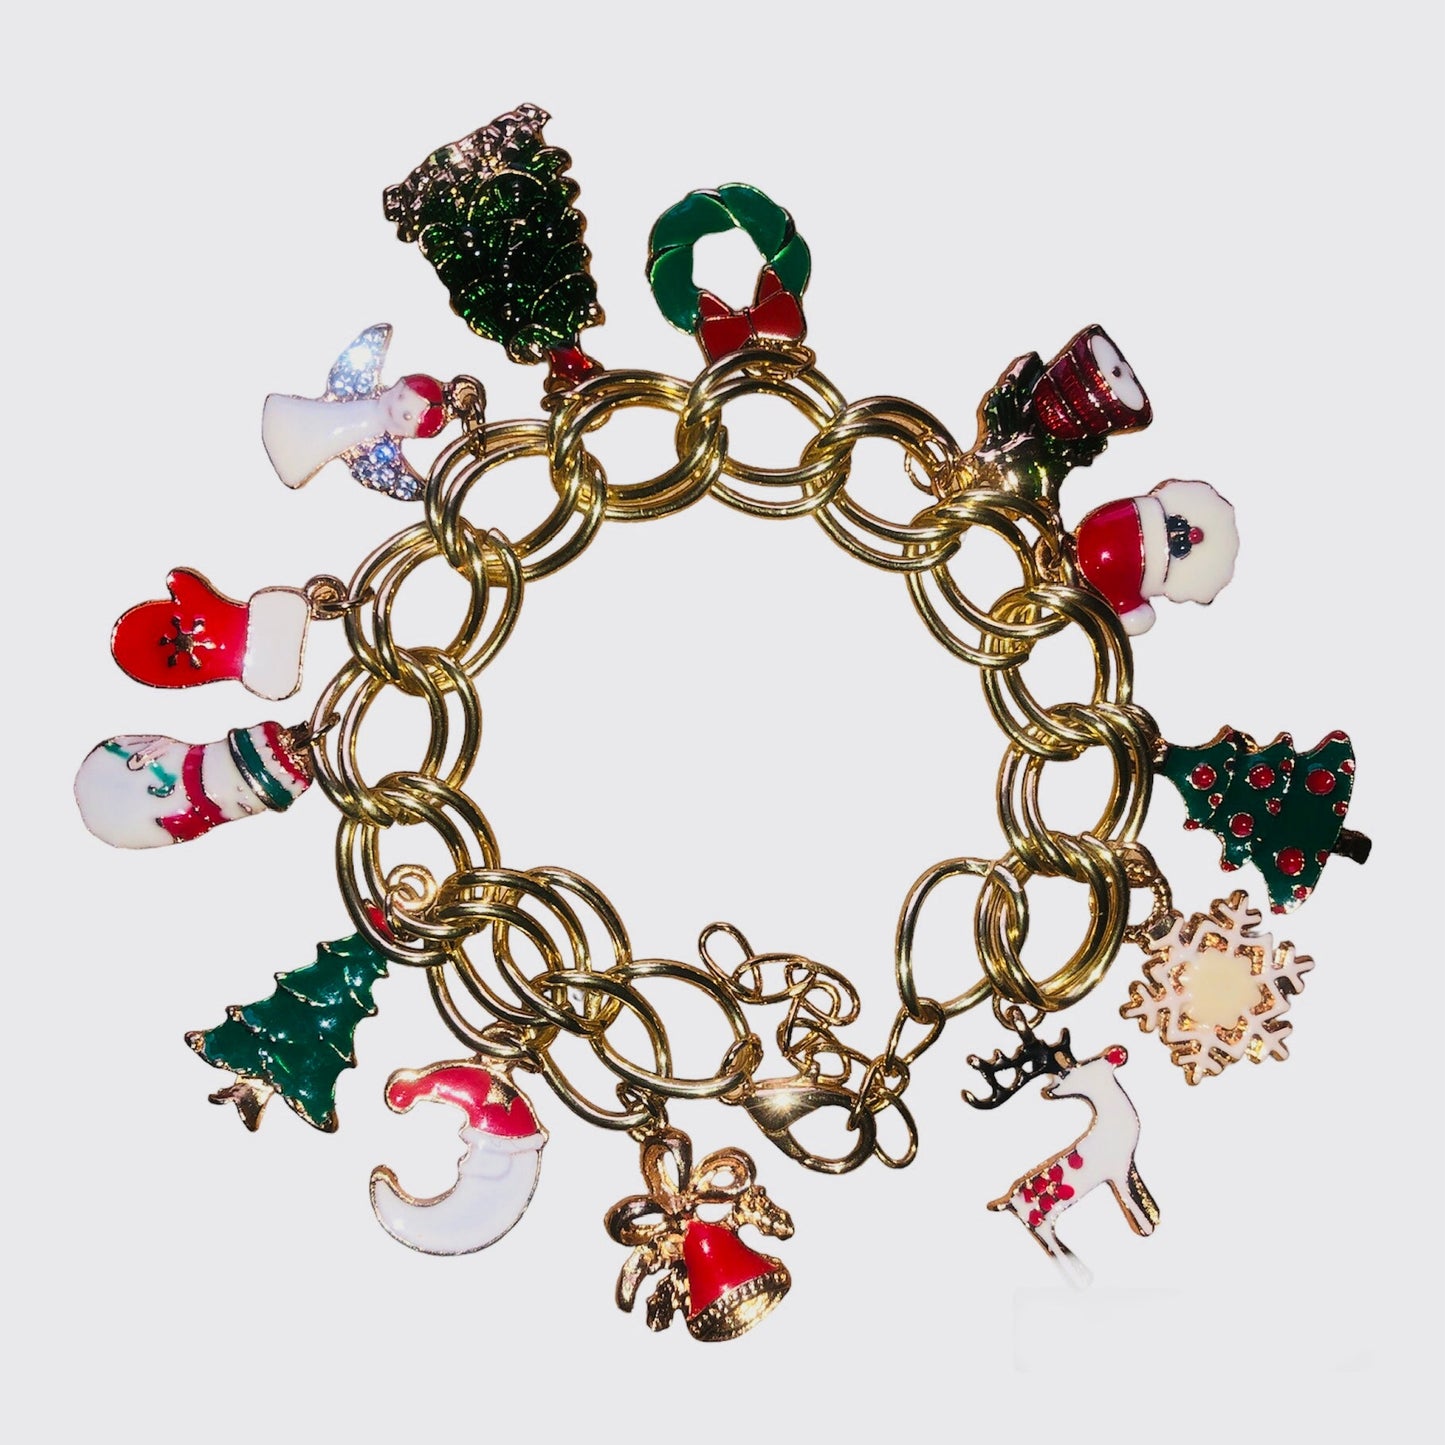 Christmasy Gold-plated Charm Bracelet KAS WARWAS